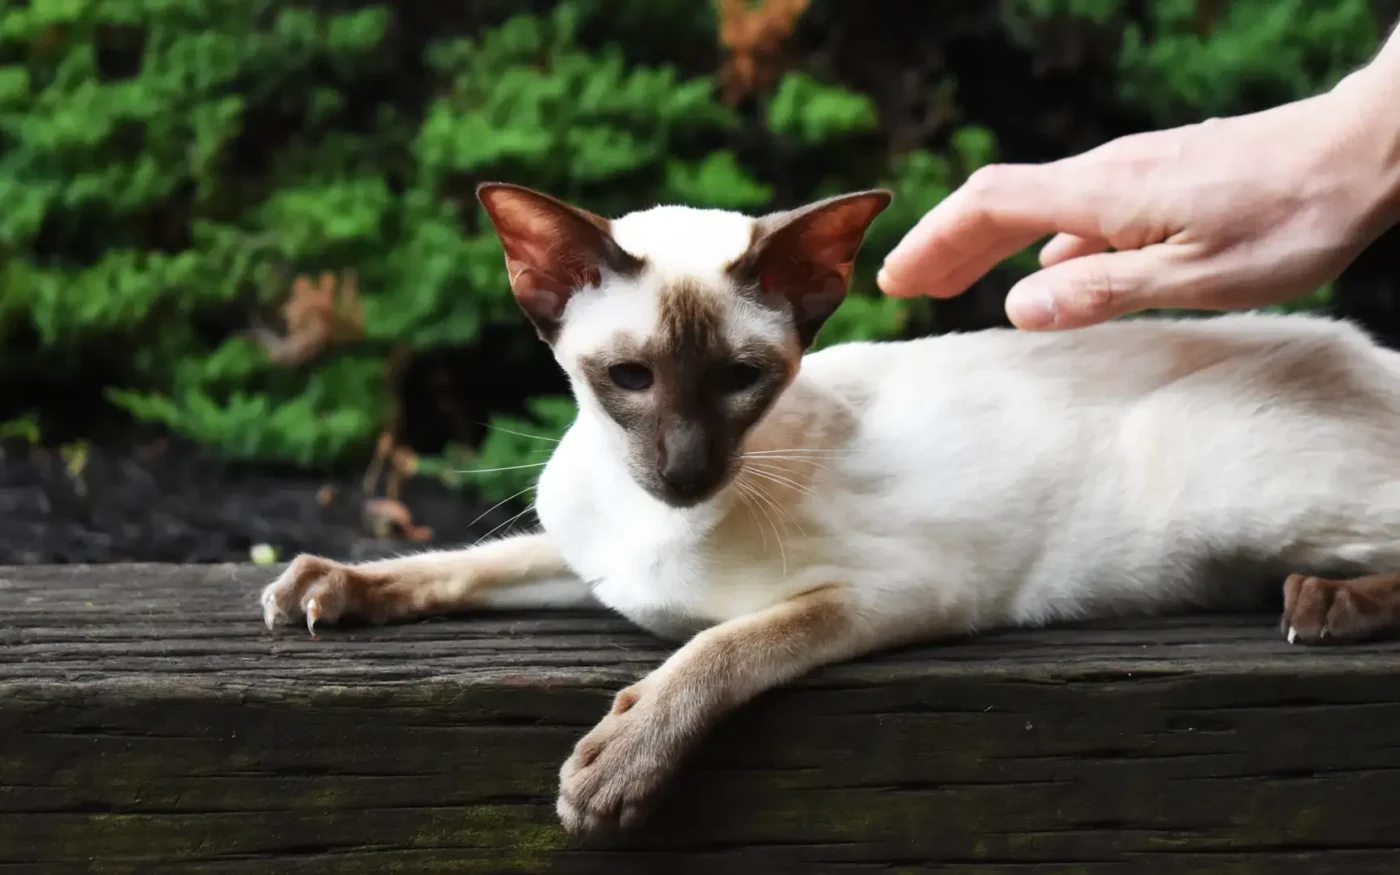 Siamese cat being stroked by a human hand